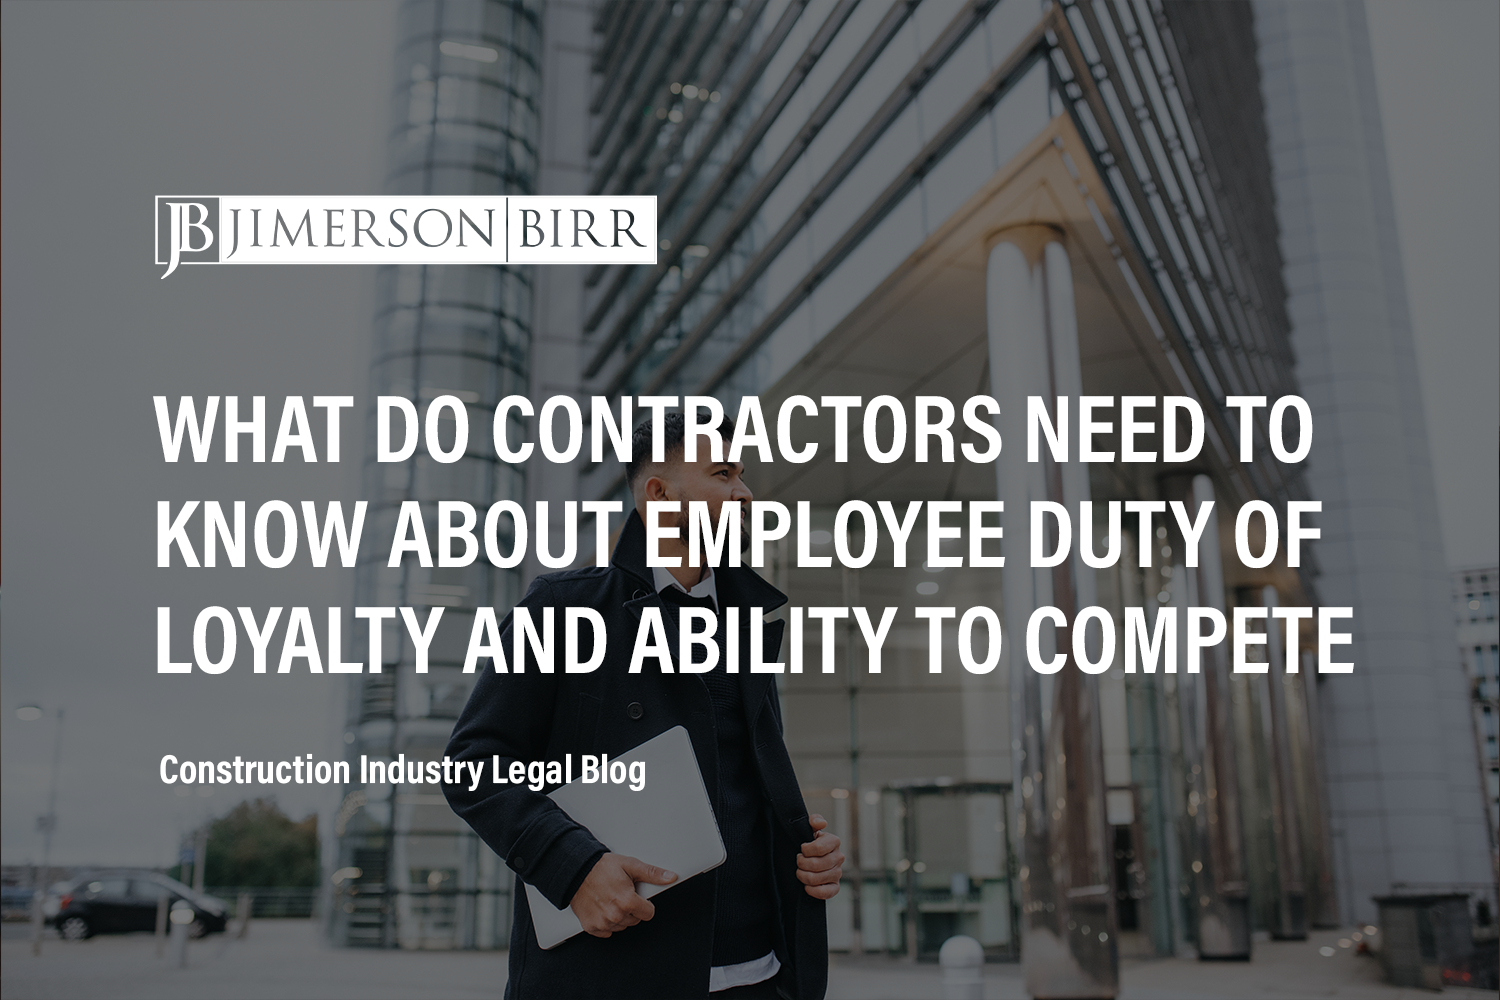 What Do Contractors Need to Know About Employee Duty of Loyalty and Ability to Compete